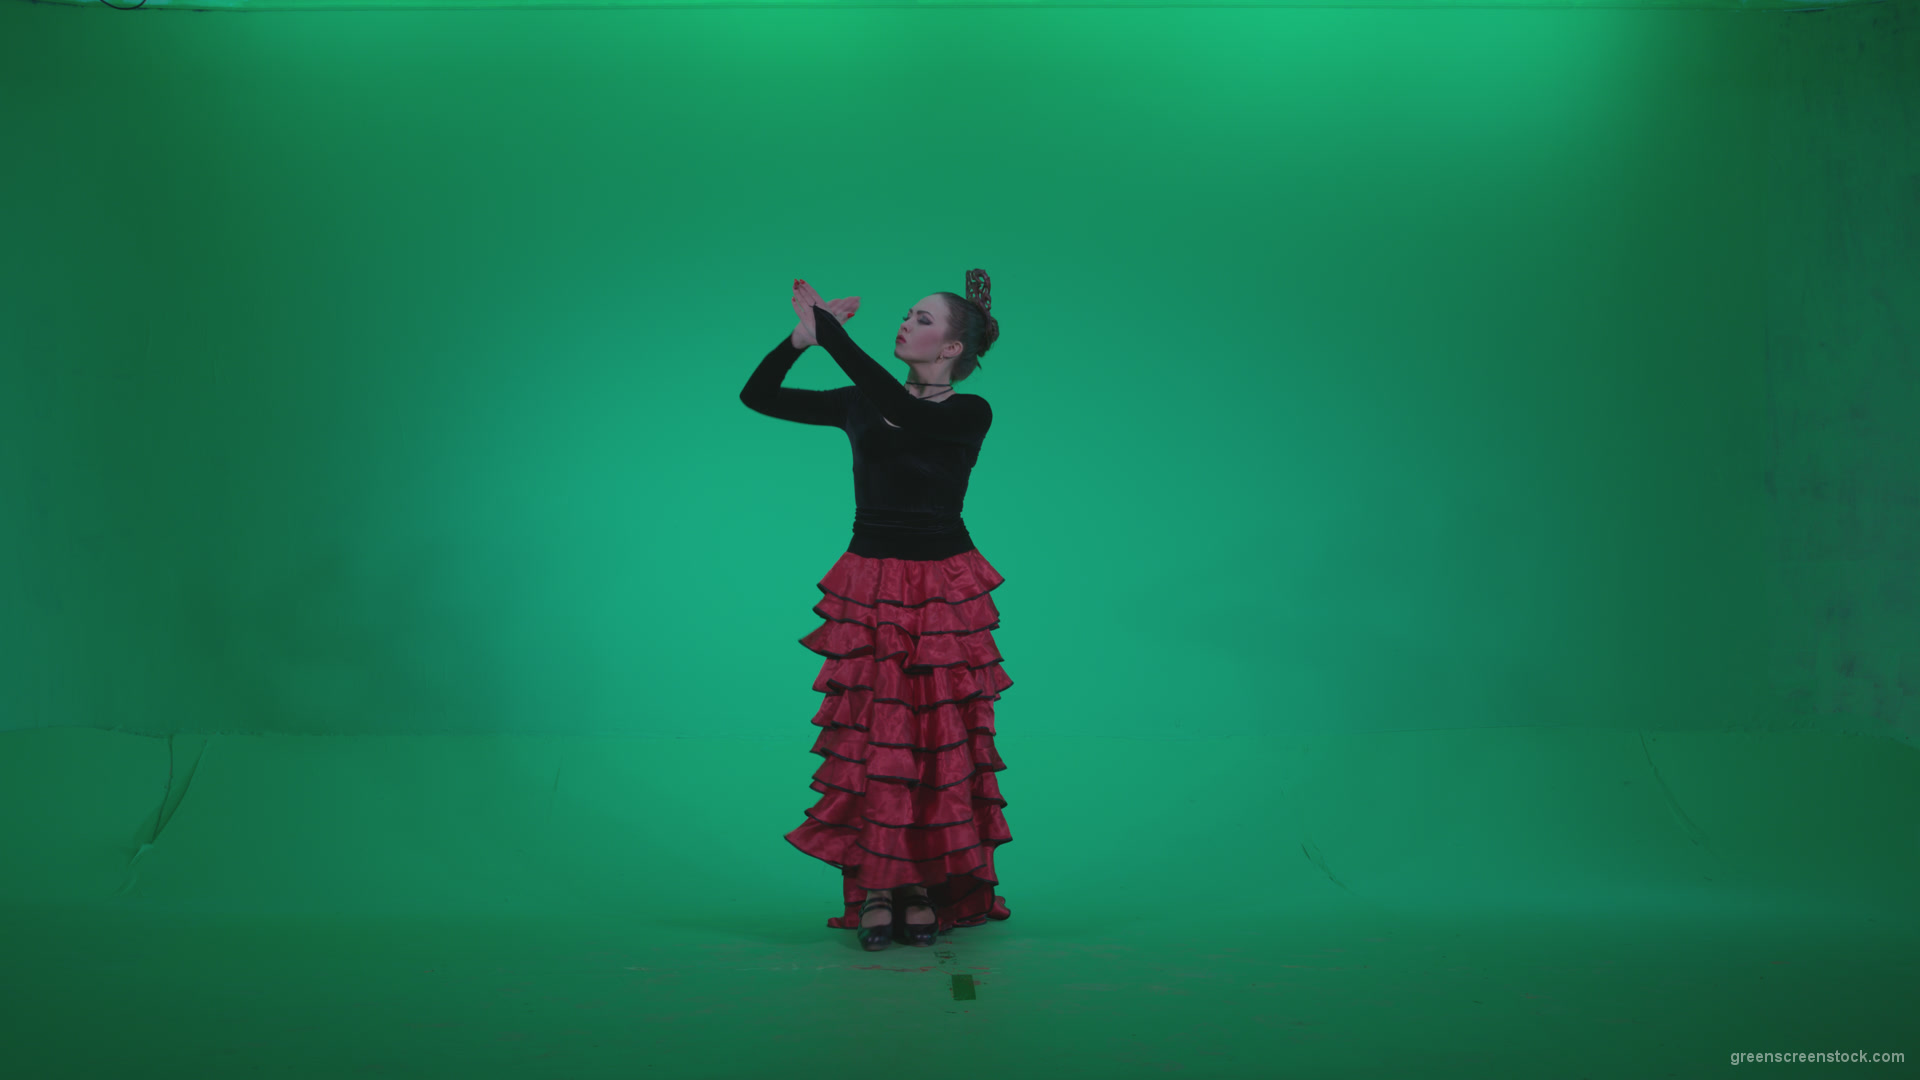 Flamenco-Red-and-Black-Dress-rb9-Green-Screen-Video-Footage_002 Green Screen Stock